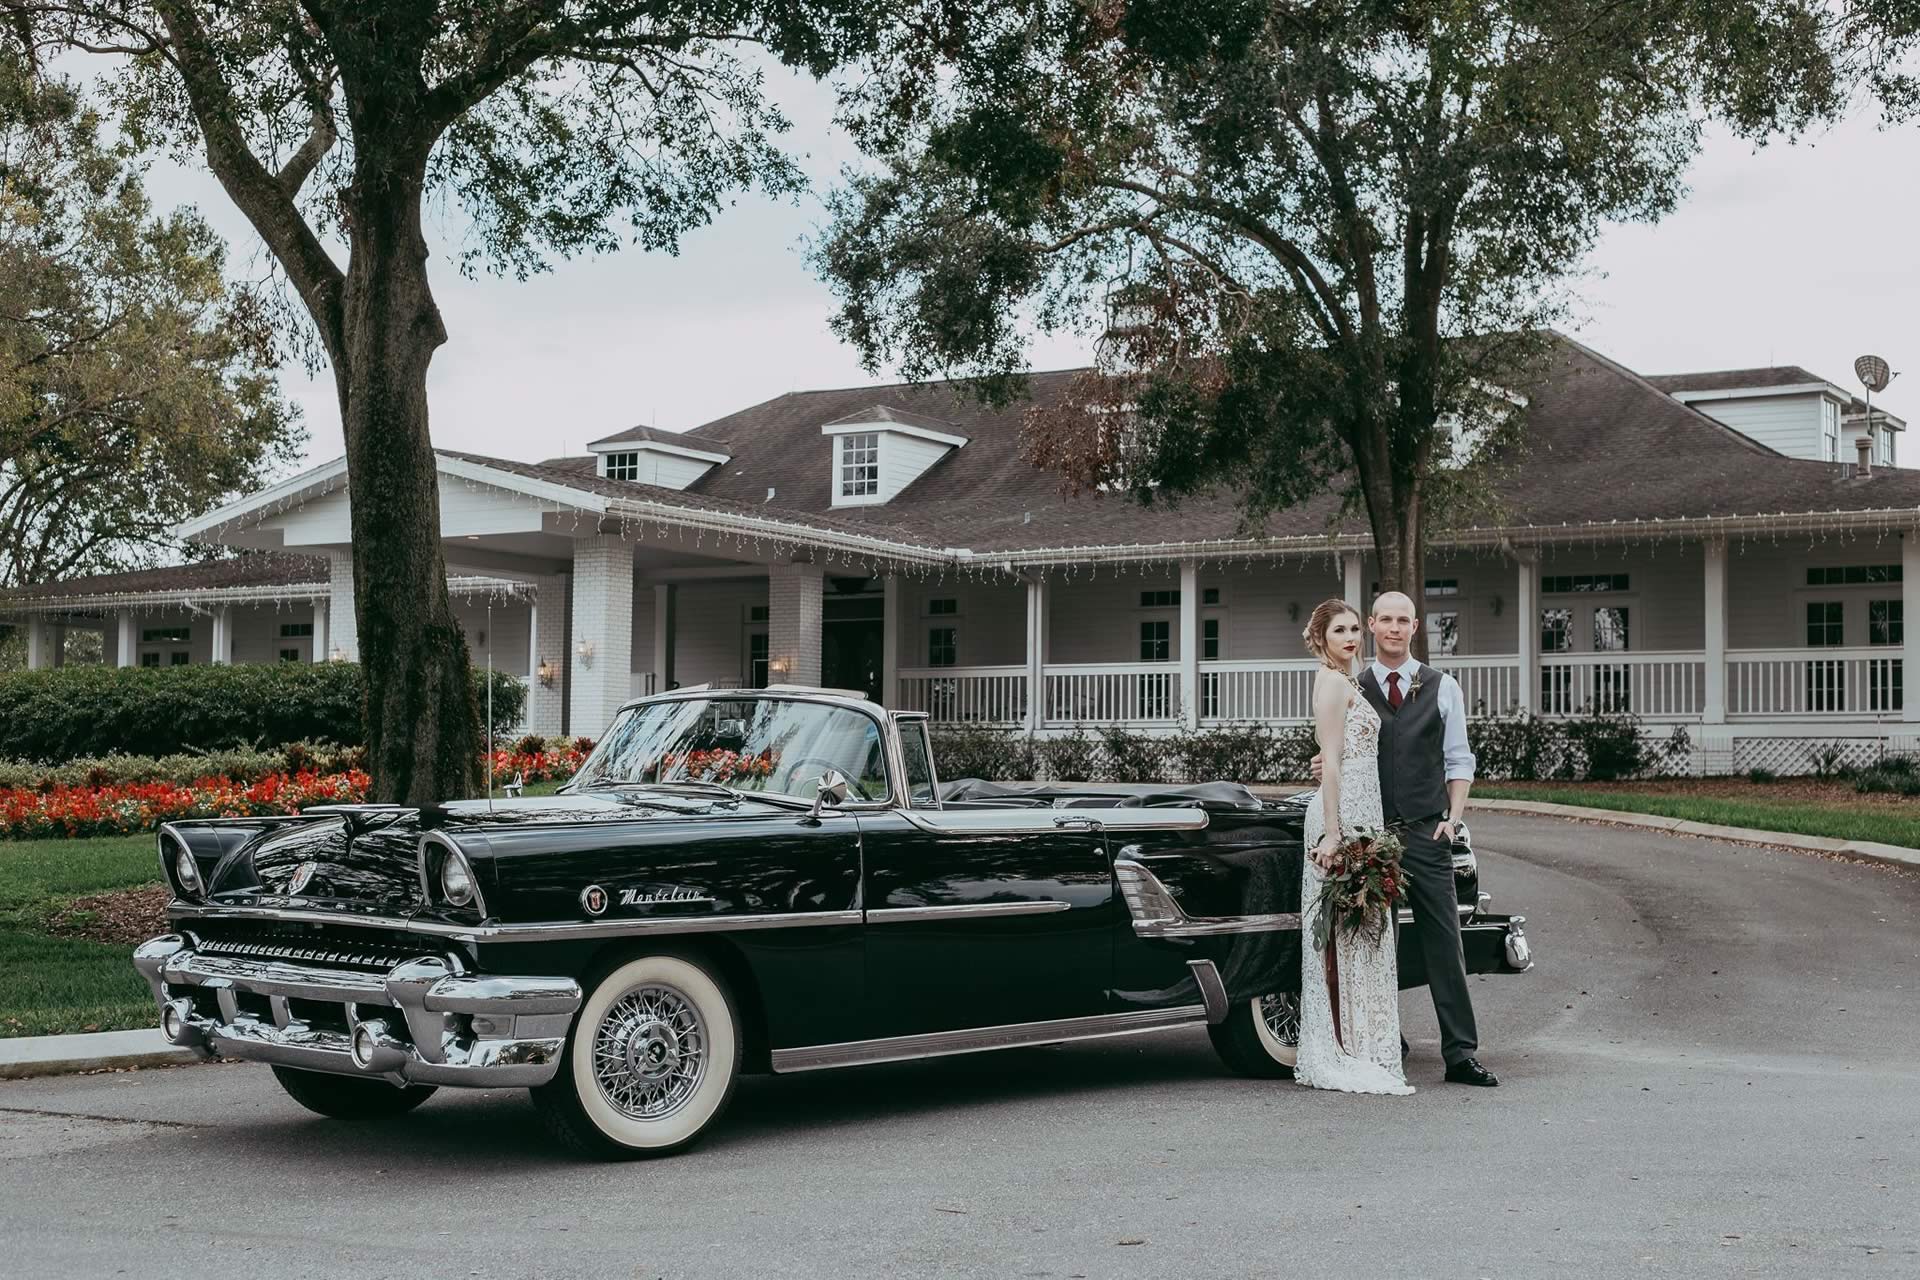 Inspiration Antique cars orlando rental for weddings with Best Inspiration